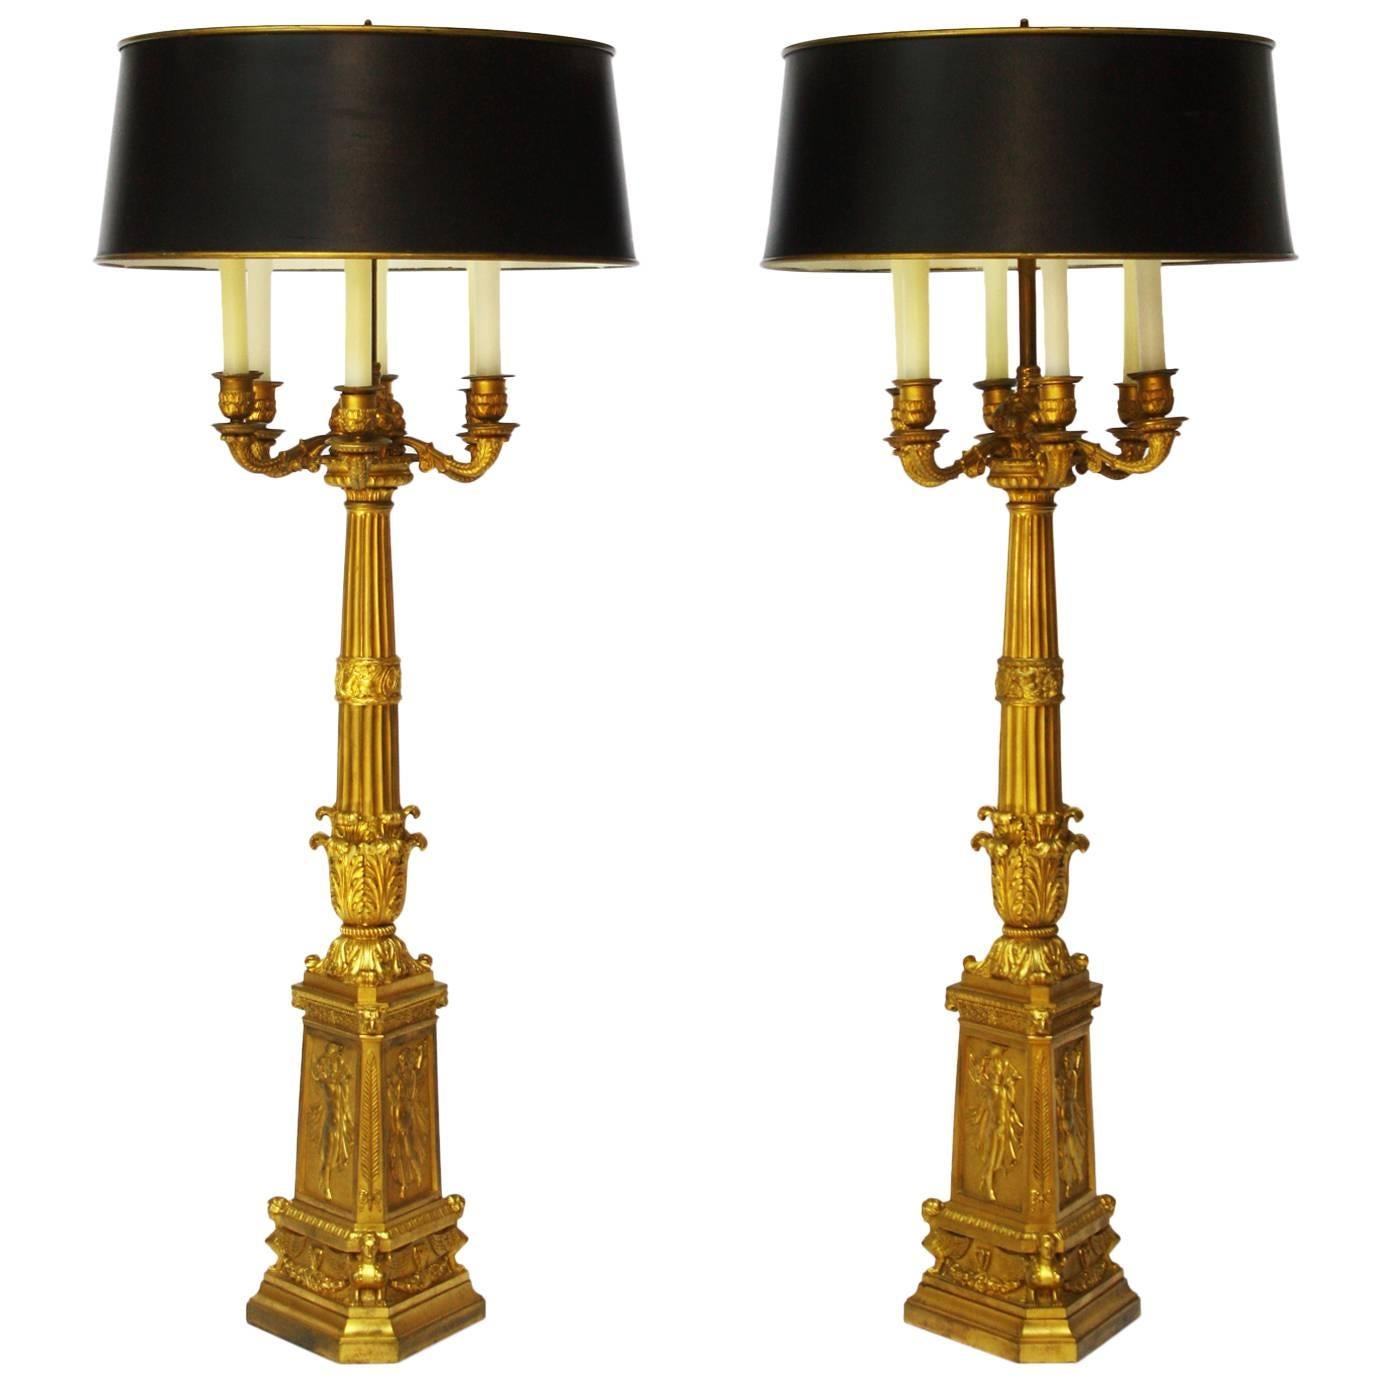 Pair of Tall French Empire Bronze Doré Six-Arm Candelabra as Lamps